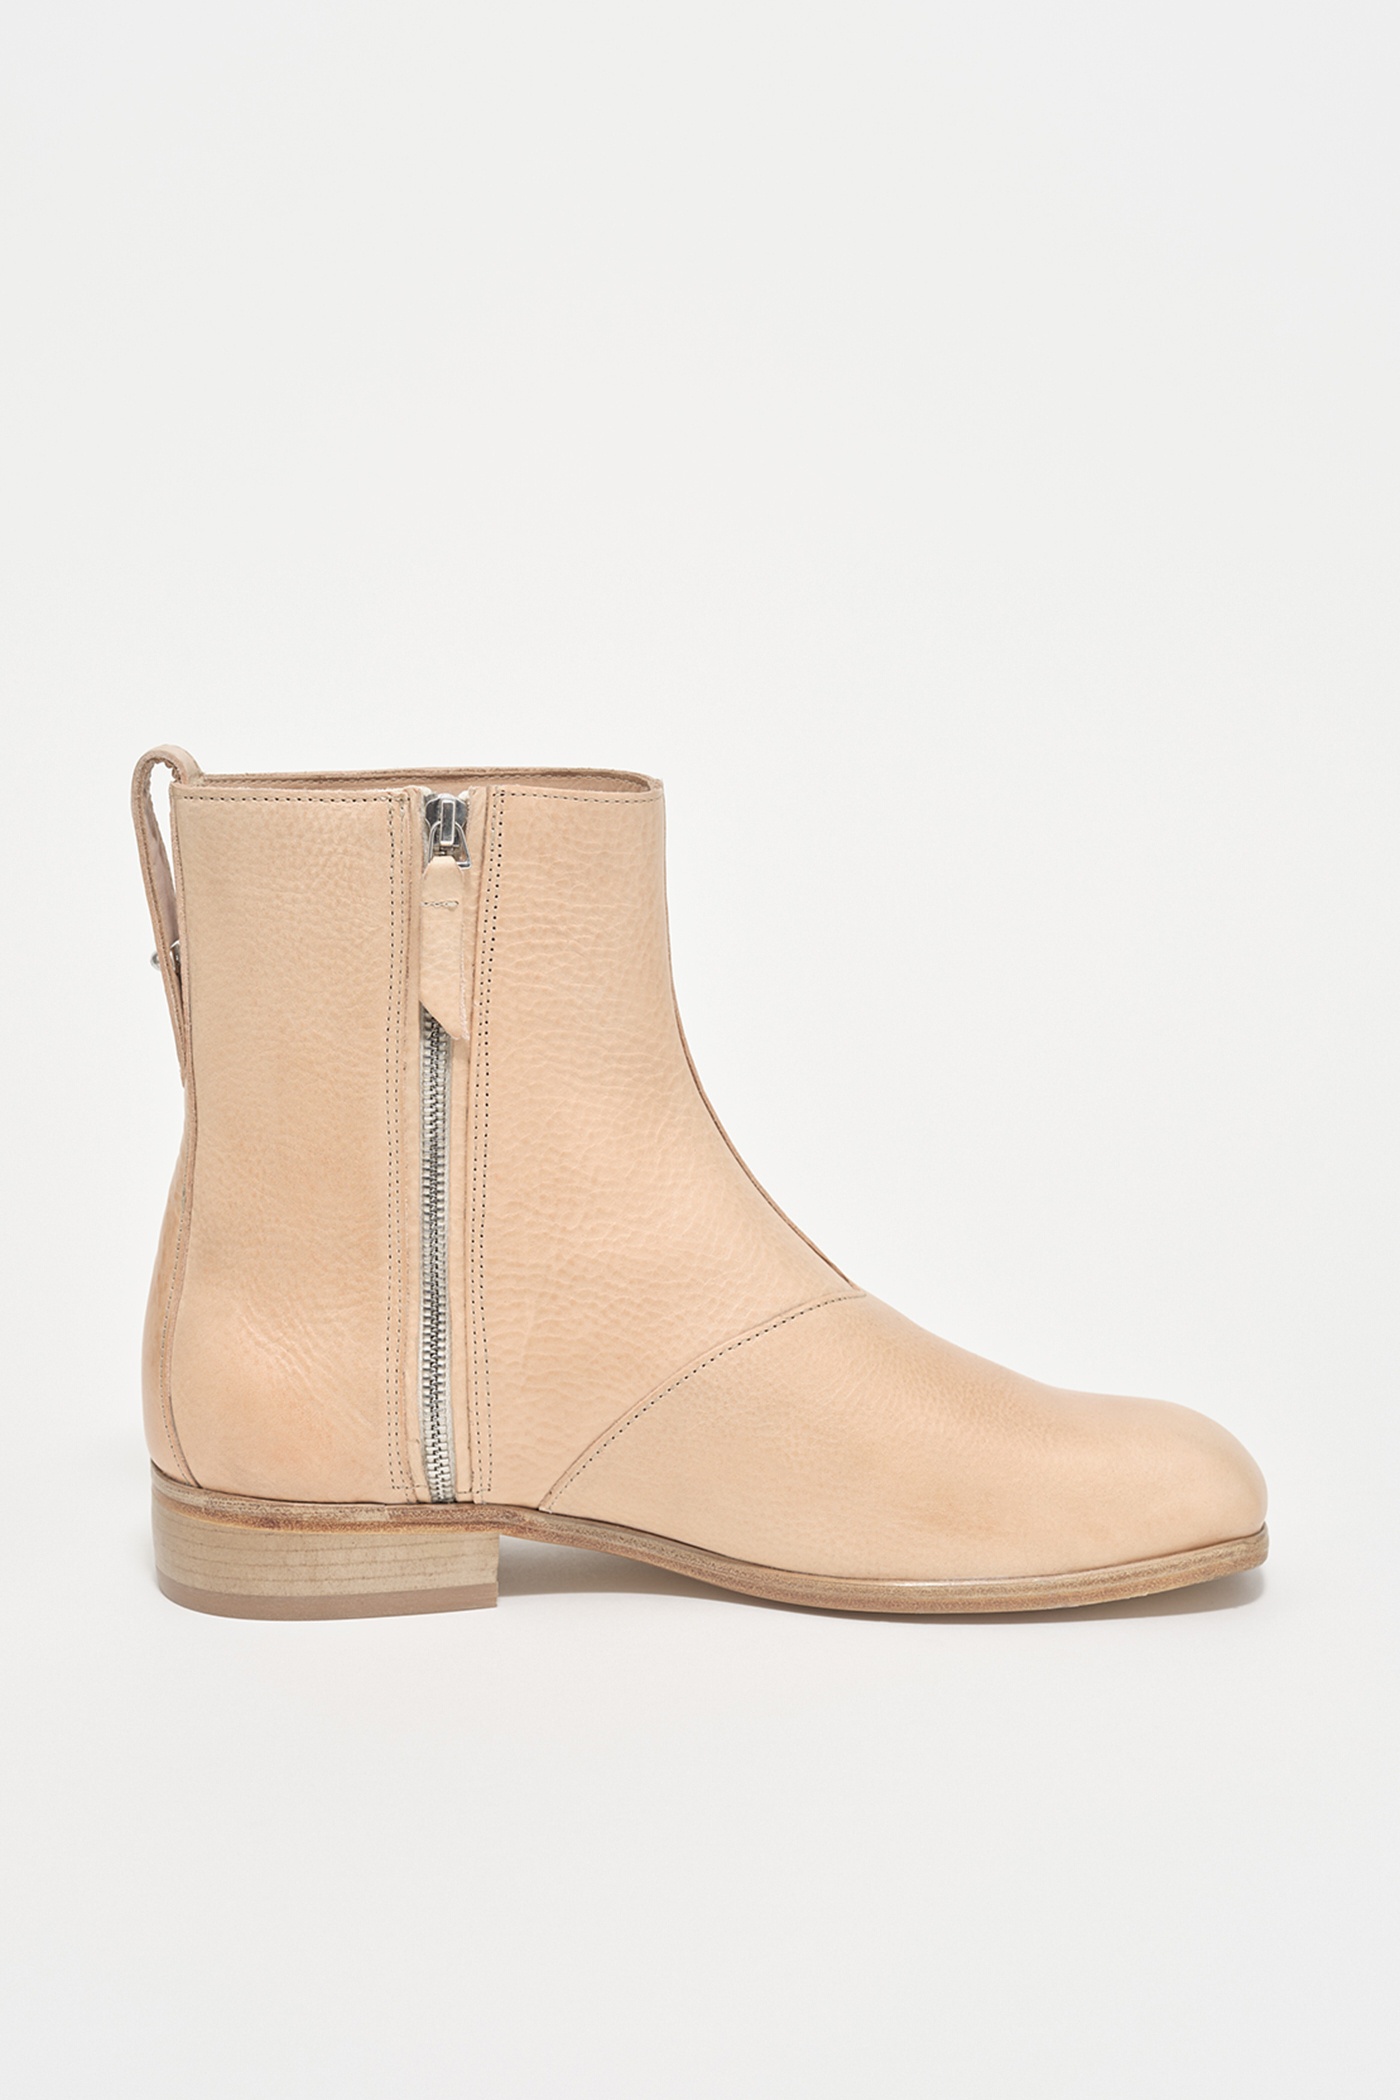 Michaelis Boot Waxy Natural Tan Leather - 4